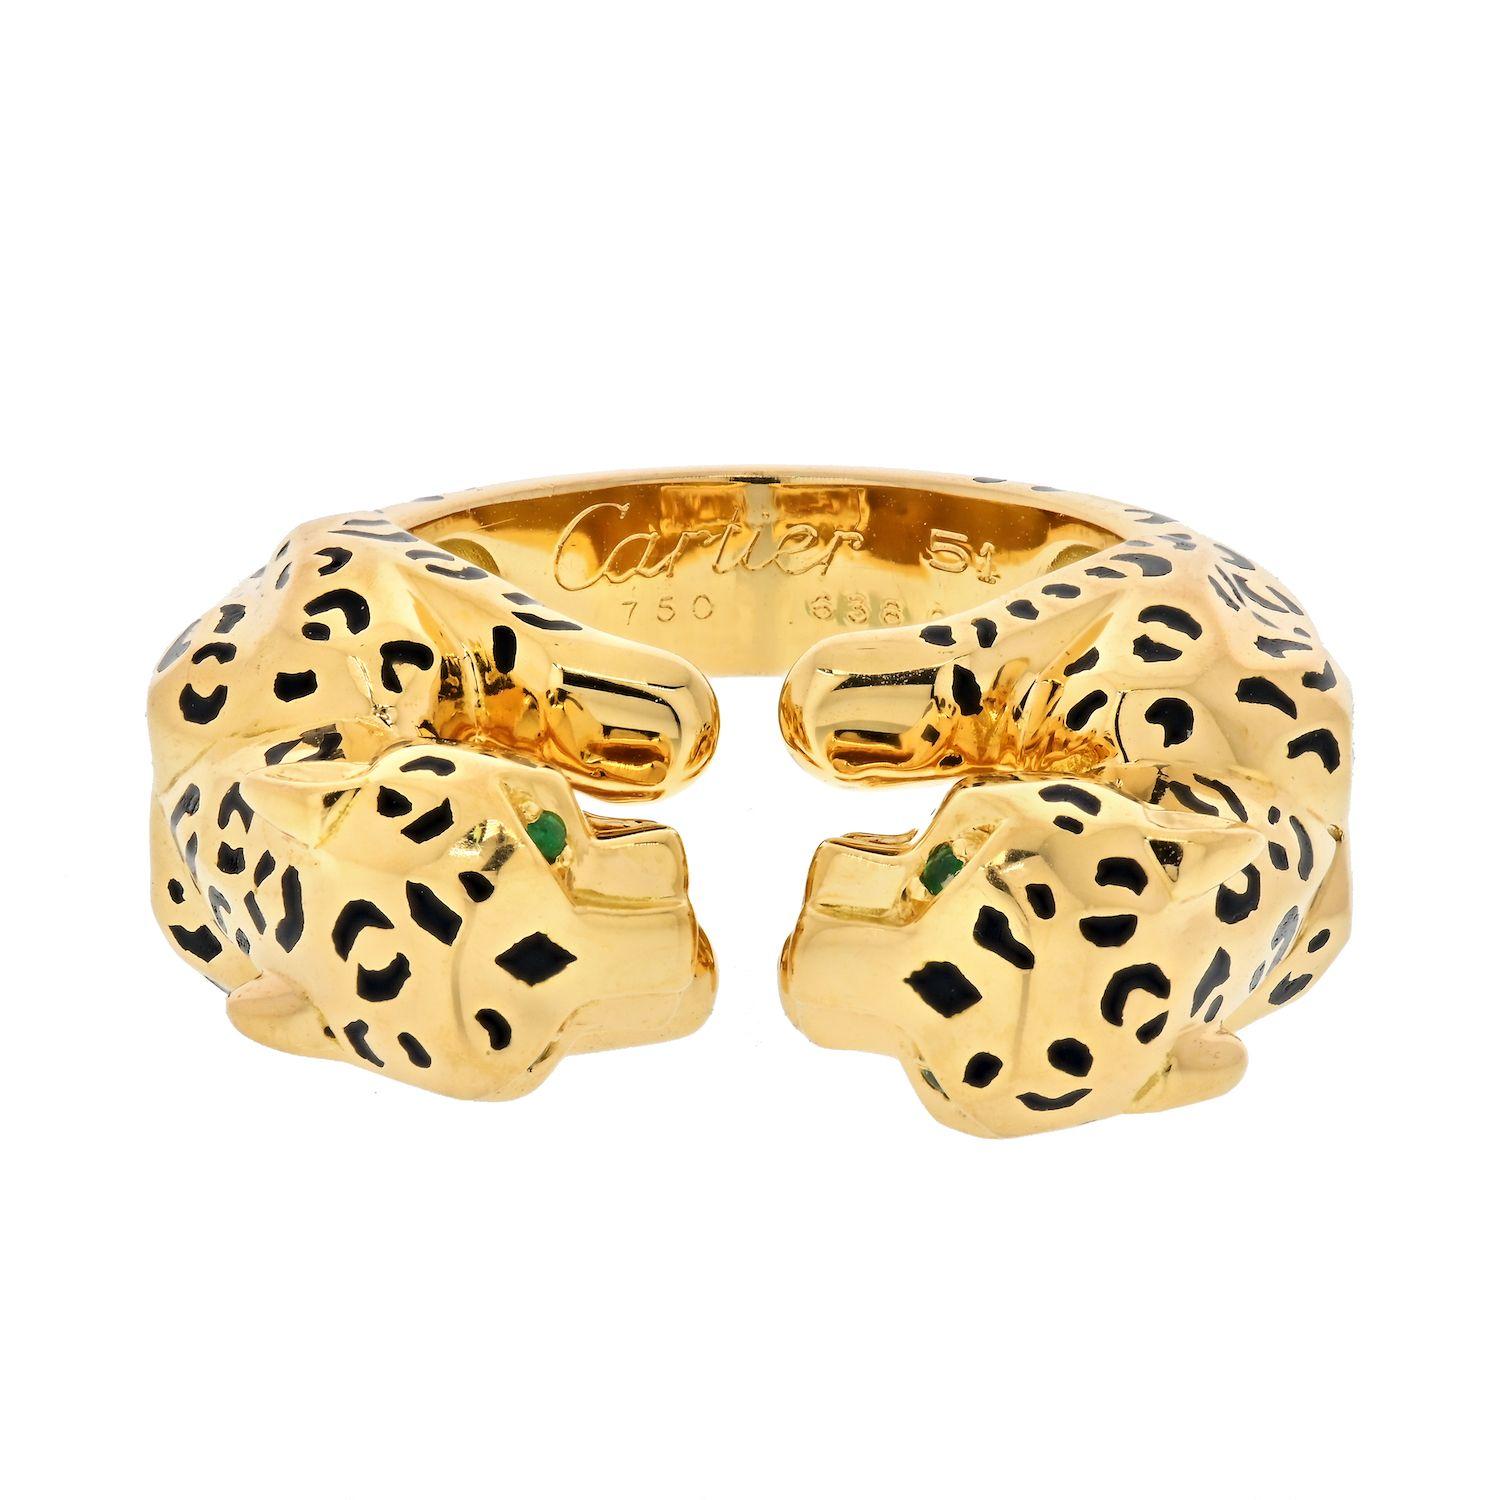 Modern Cartier 18K Yellow Gold Double Panthere Ring